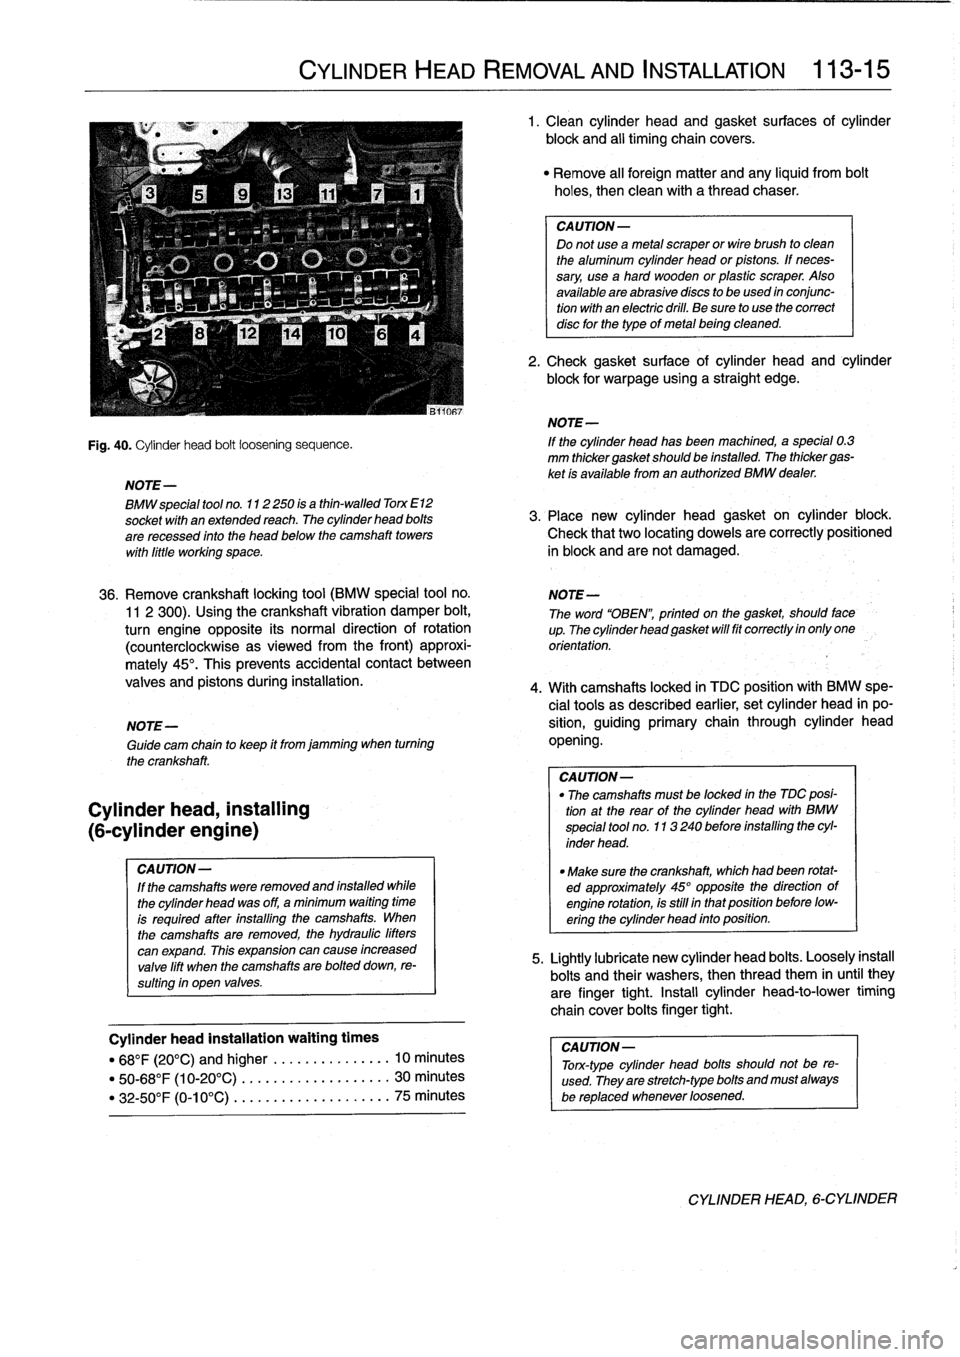 BMW 318i 1998 E36 Workshop Manual 
NOTE-

Cylinder
head,
installing

(6-cylinder
engine)

CAUTION-

If
the
camshafts
were
removed
and
installed
while

the
cylinder
head
was
off,
a
minimum
waiting
time

is
required
after
ínstalling
th